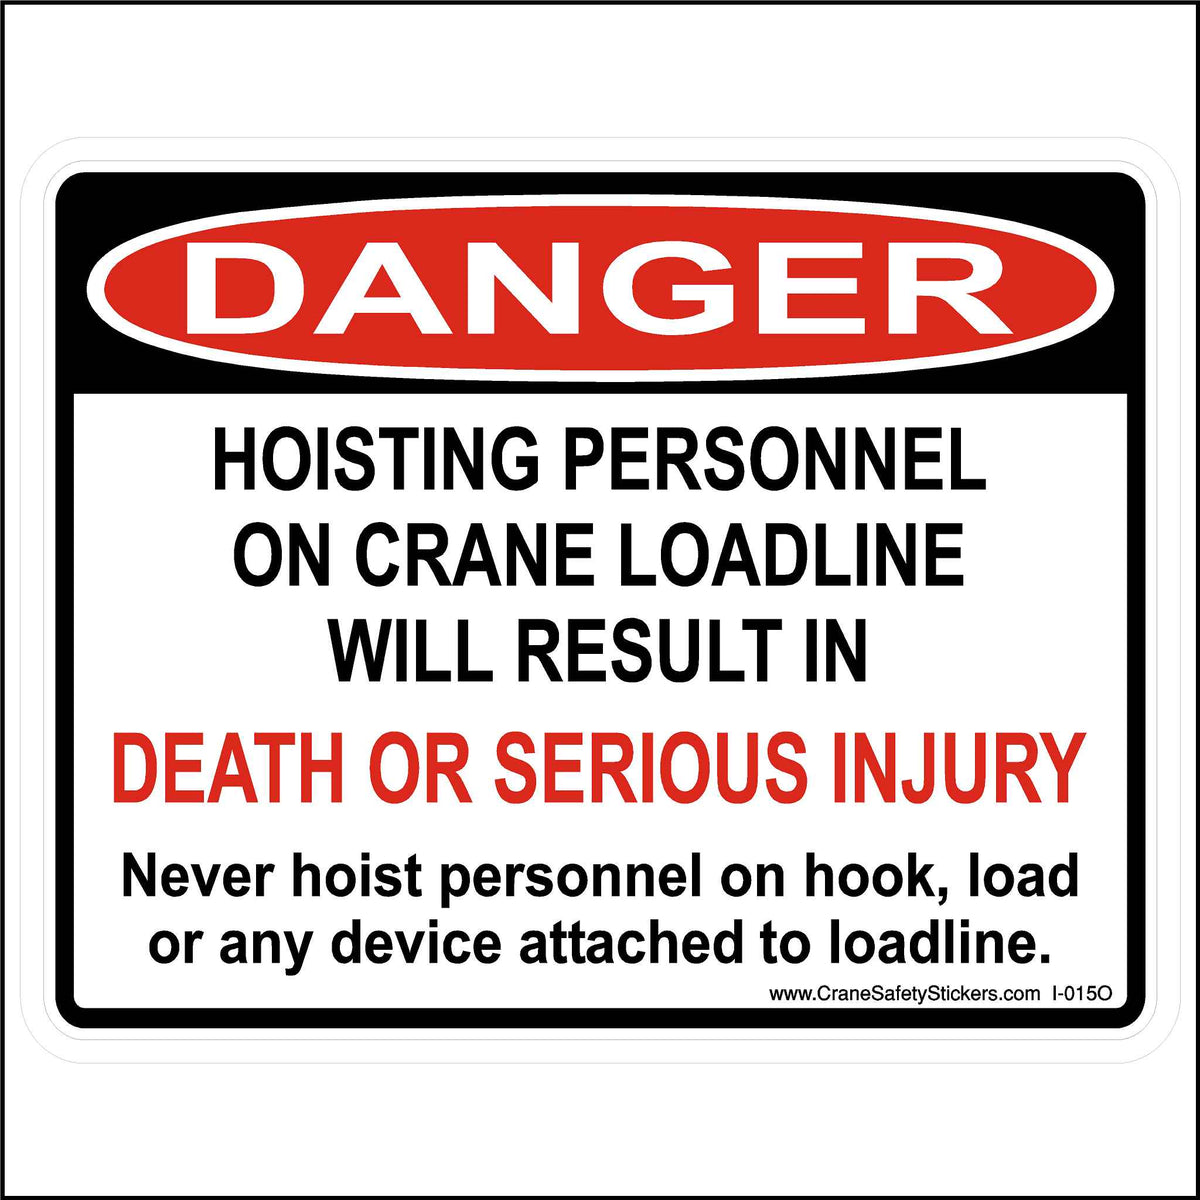 OSHA Never Hoist Personnel Sticker Printed With. OSHA Header DANGER Hoisting personnel on the crane loadline will result in death or serious injury. Never hoist personnel on the hook, load, or any device attached to loadline.